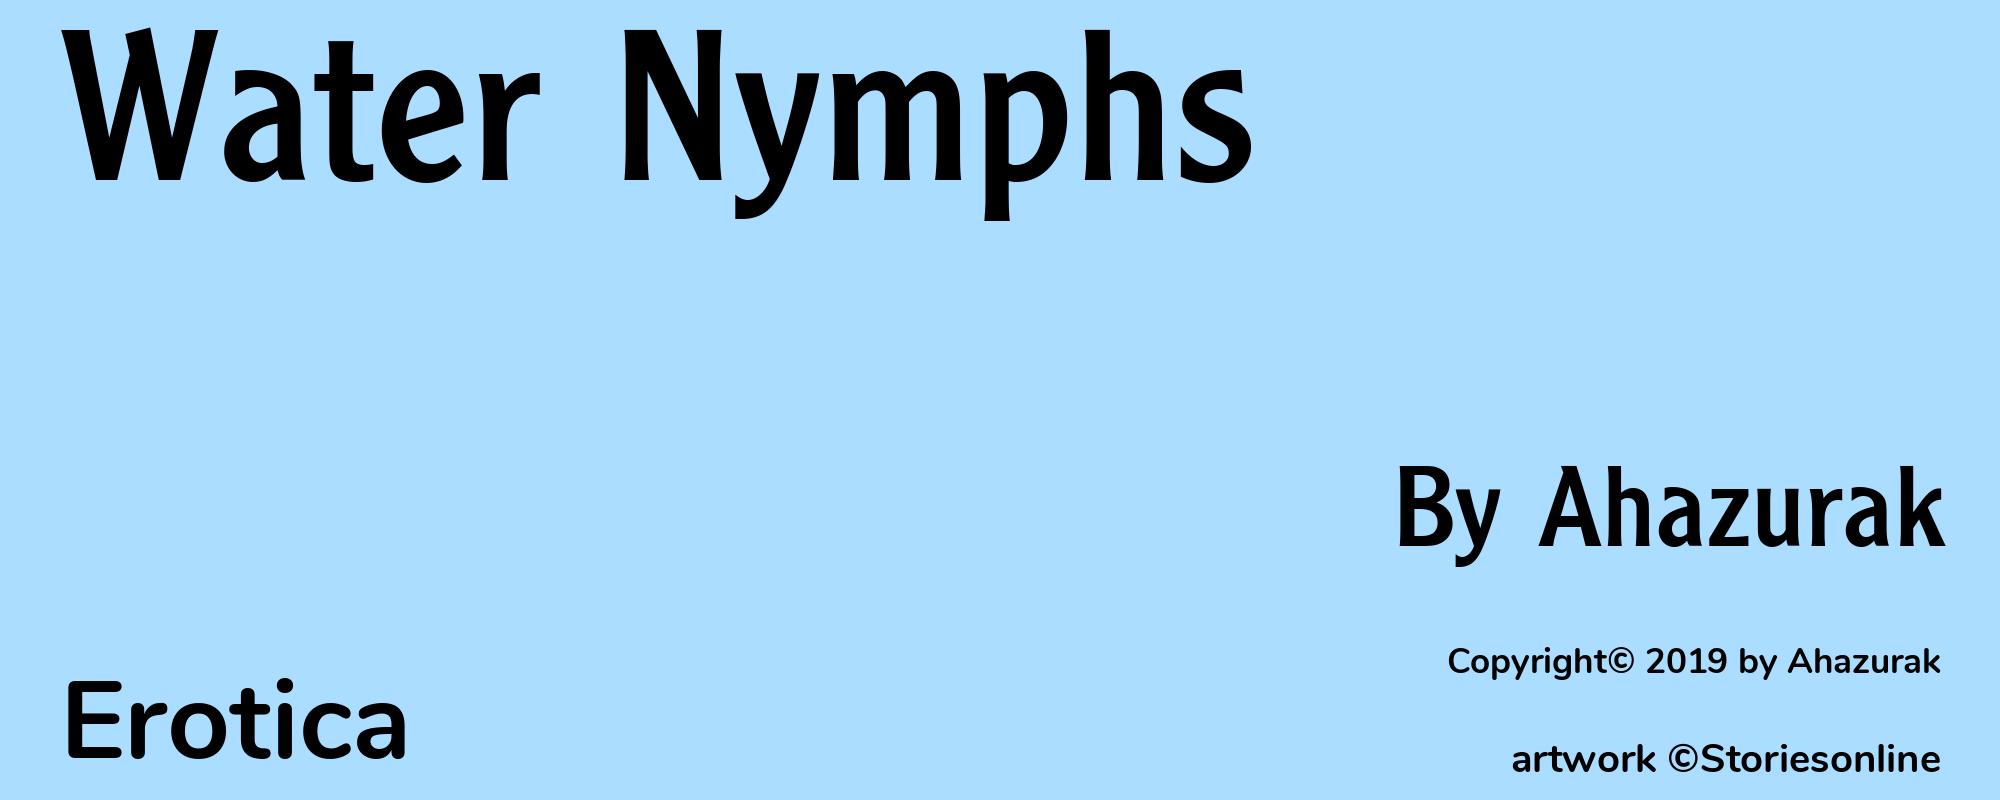 Water Nymphs - Cover